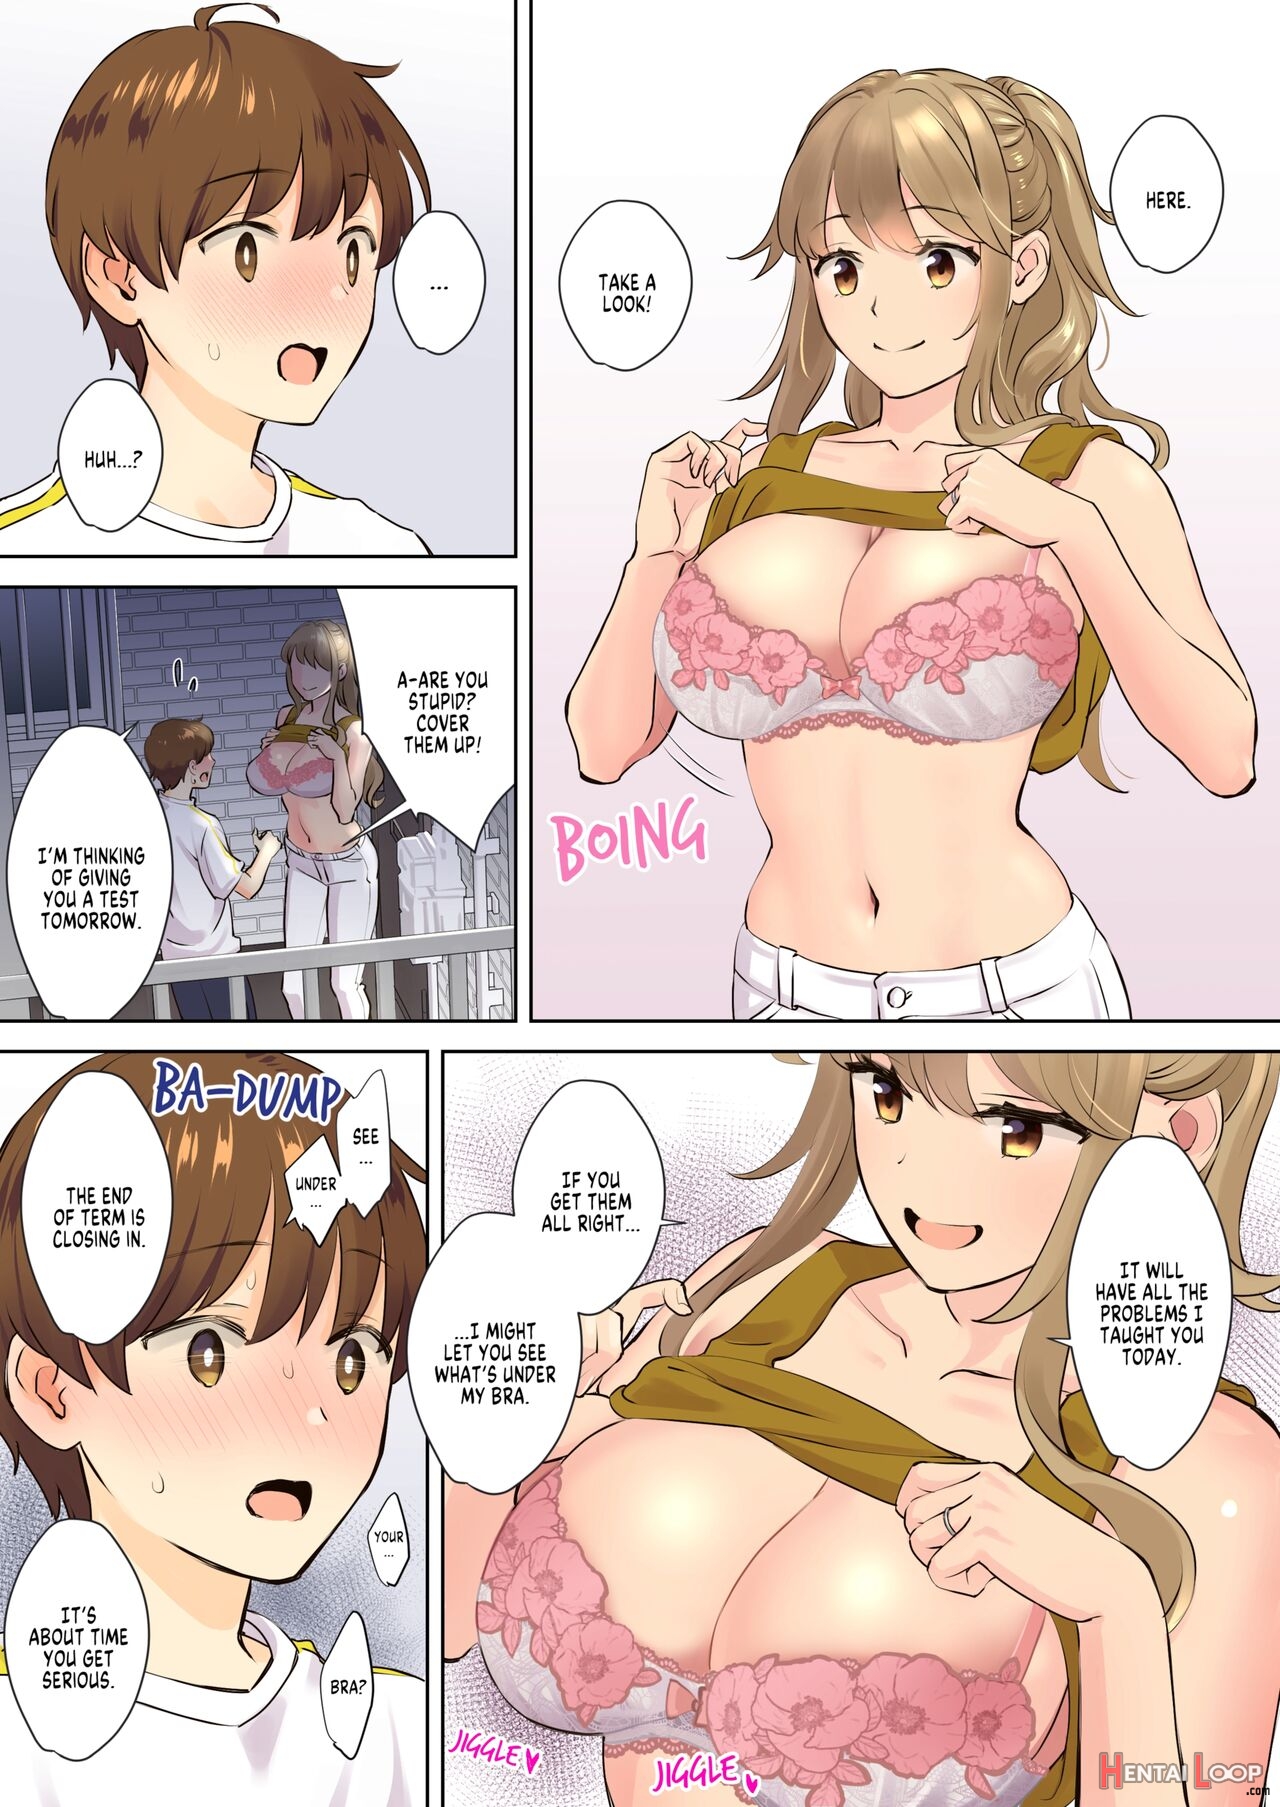 Together With My Neet Cousin page 10